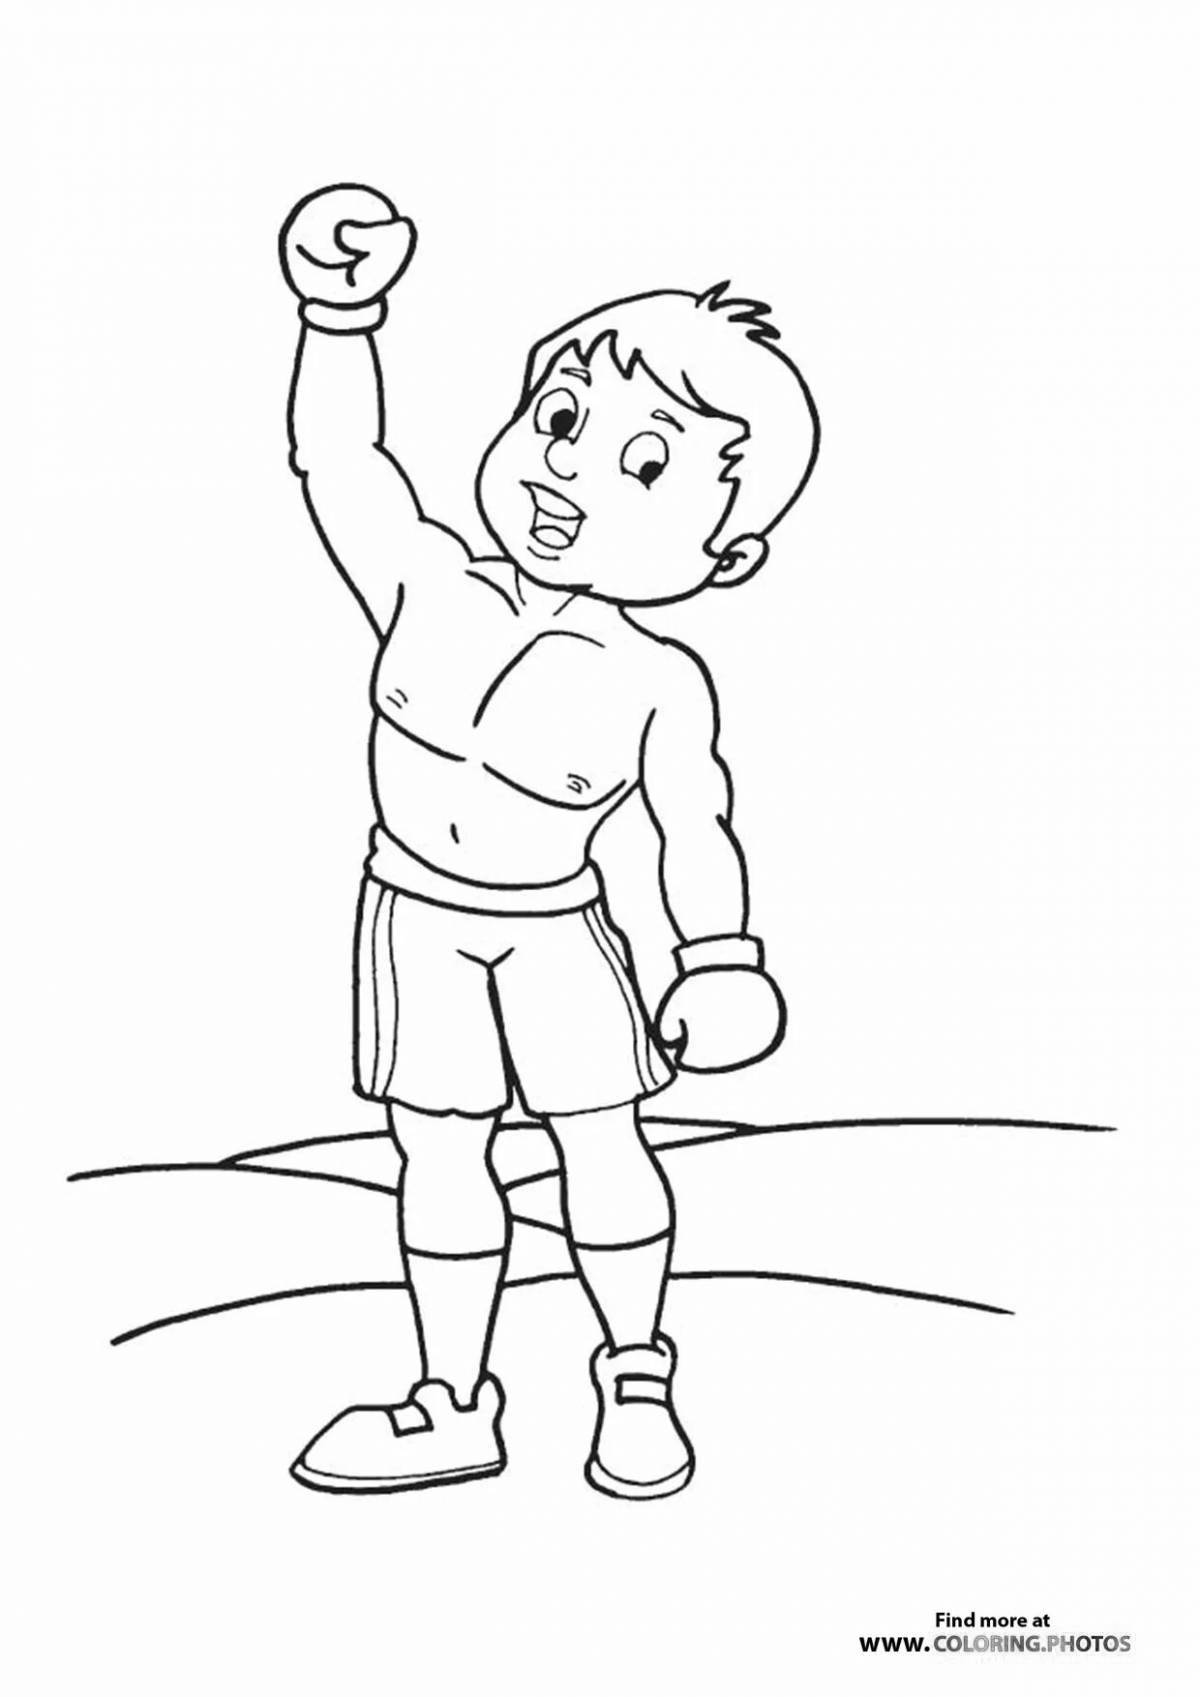 Spectacular boxing and boo coloring for kids